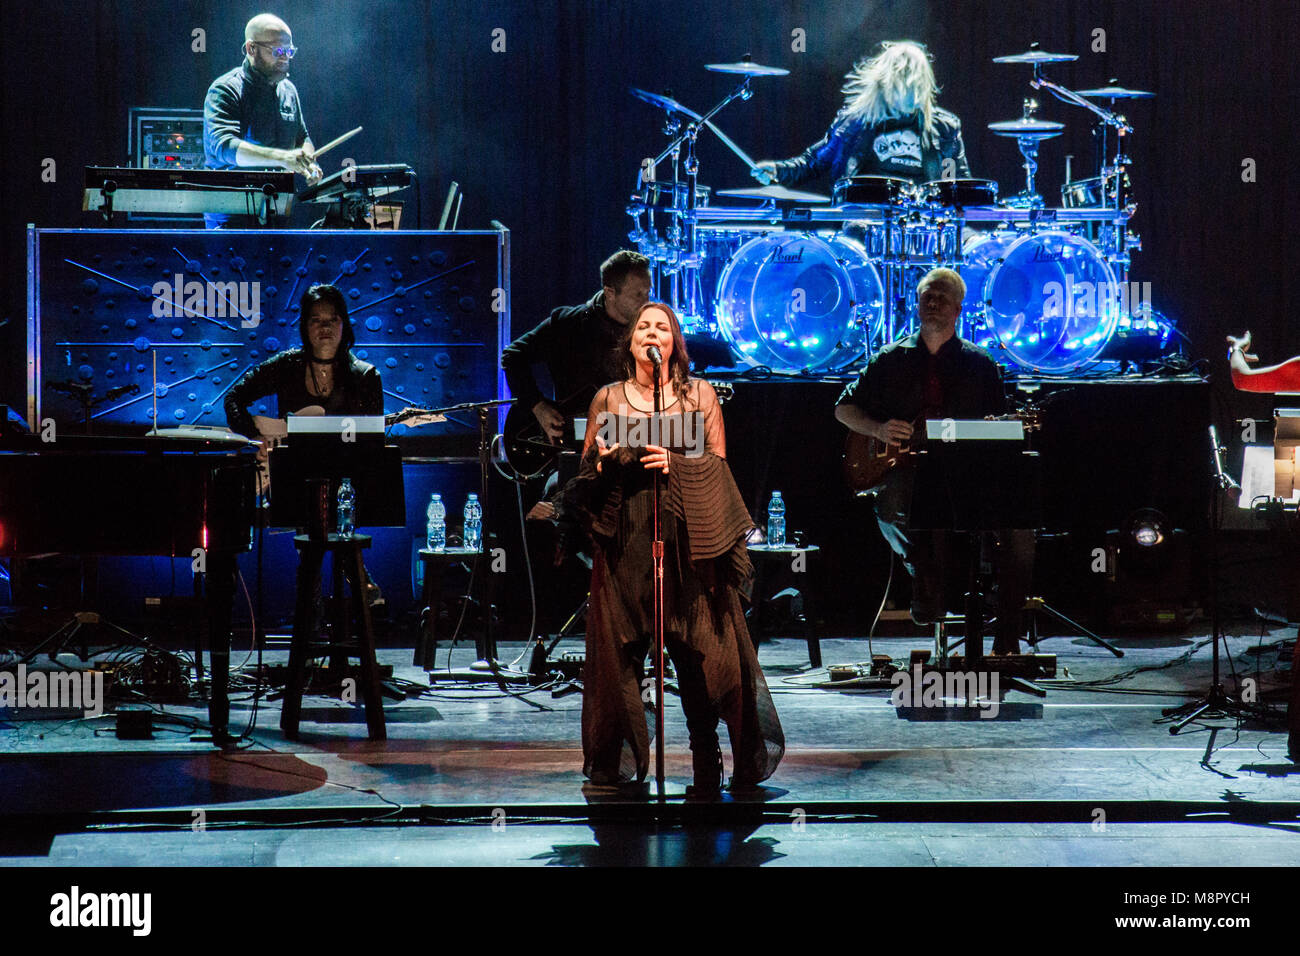 Milan Italy. 19th March 2018. The American rock band EVANESCENCE performs live on stage at Teatro Degli Arcimboldi during the 'Synthesis Tour'. Credit: Rodolfo Sassano/Alamy Live News Stock Photo